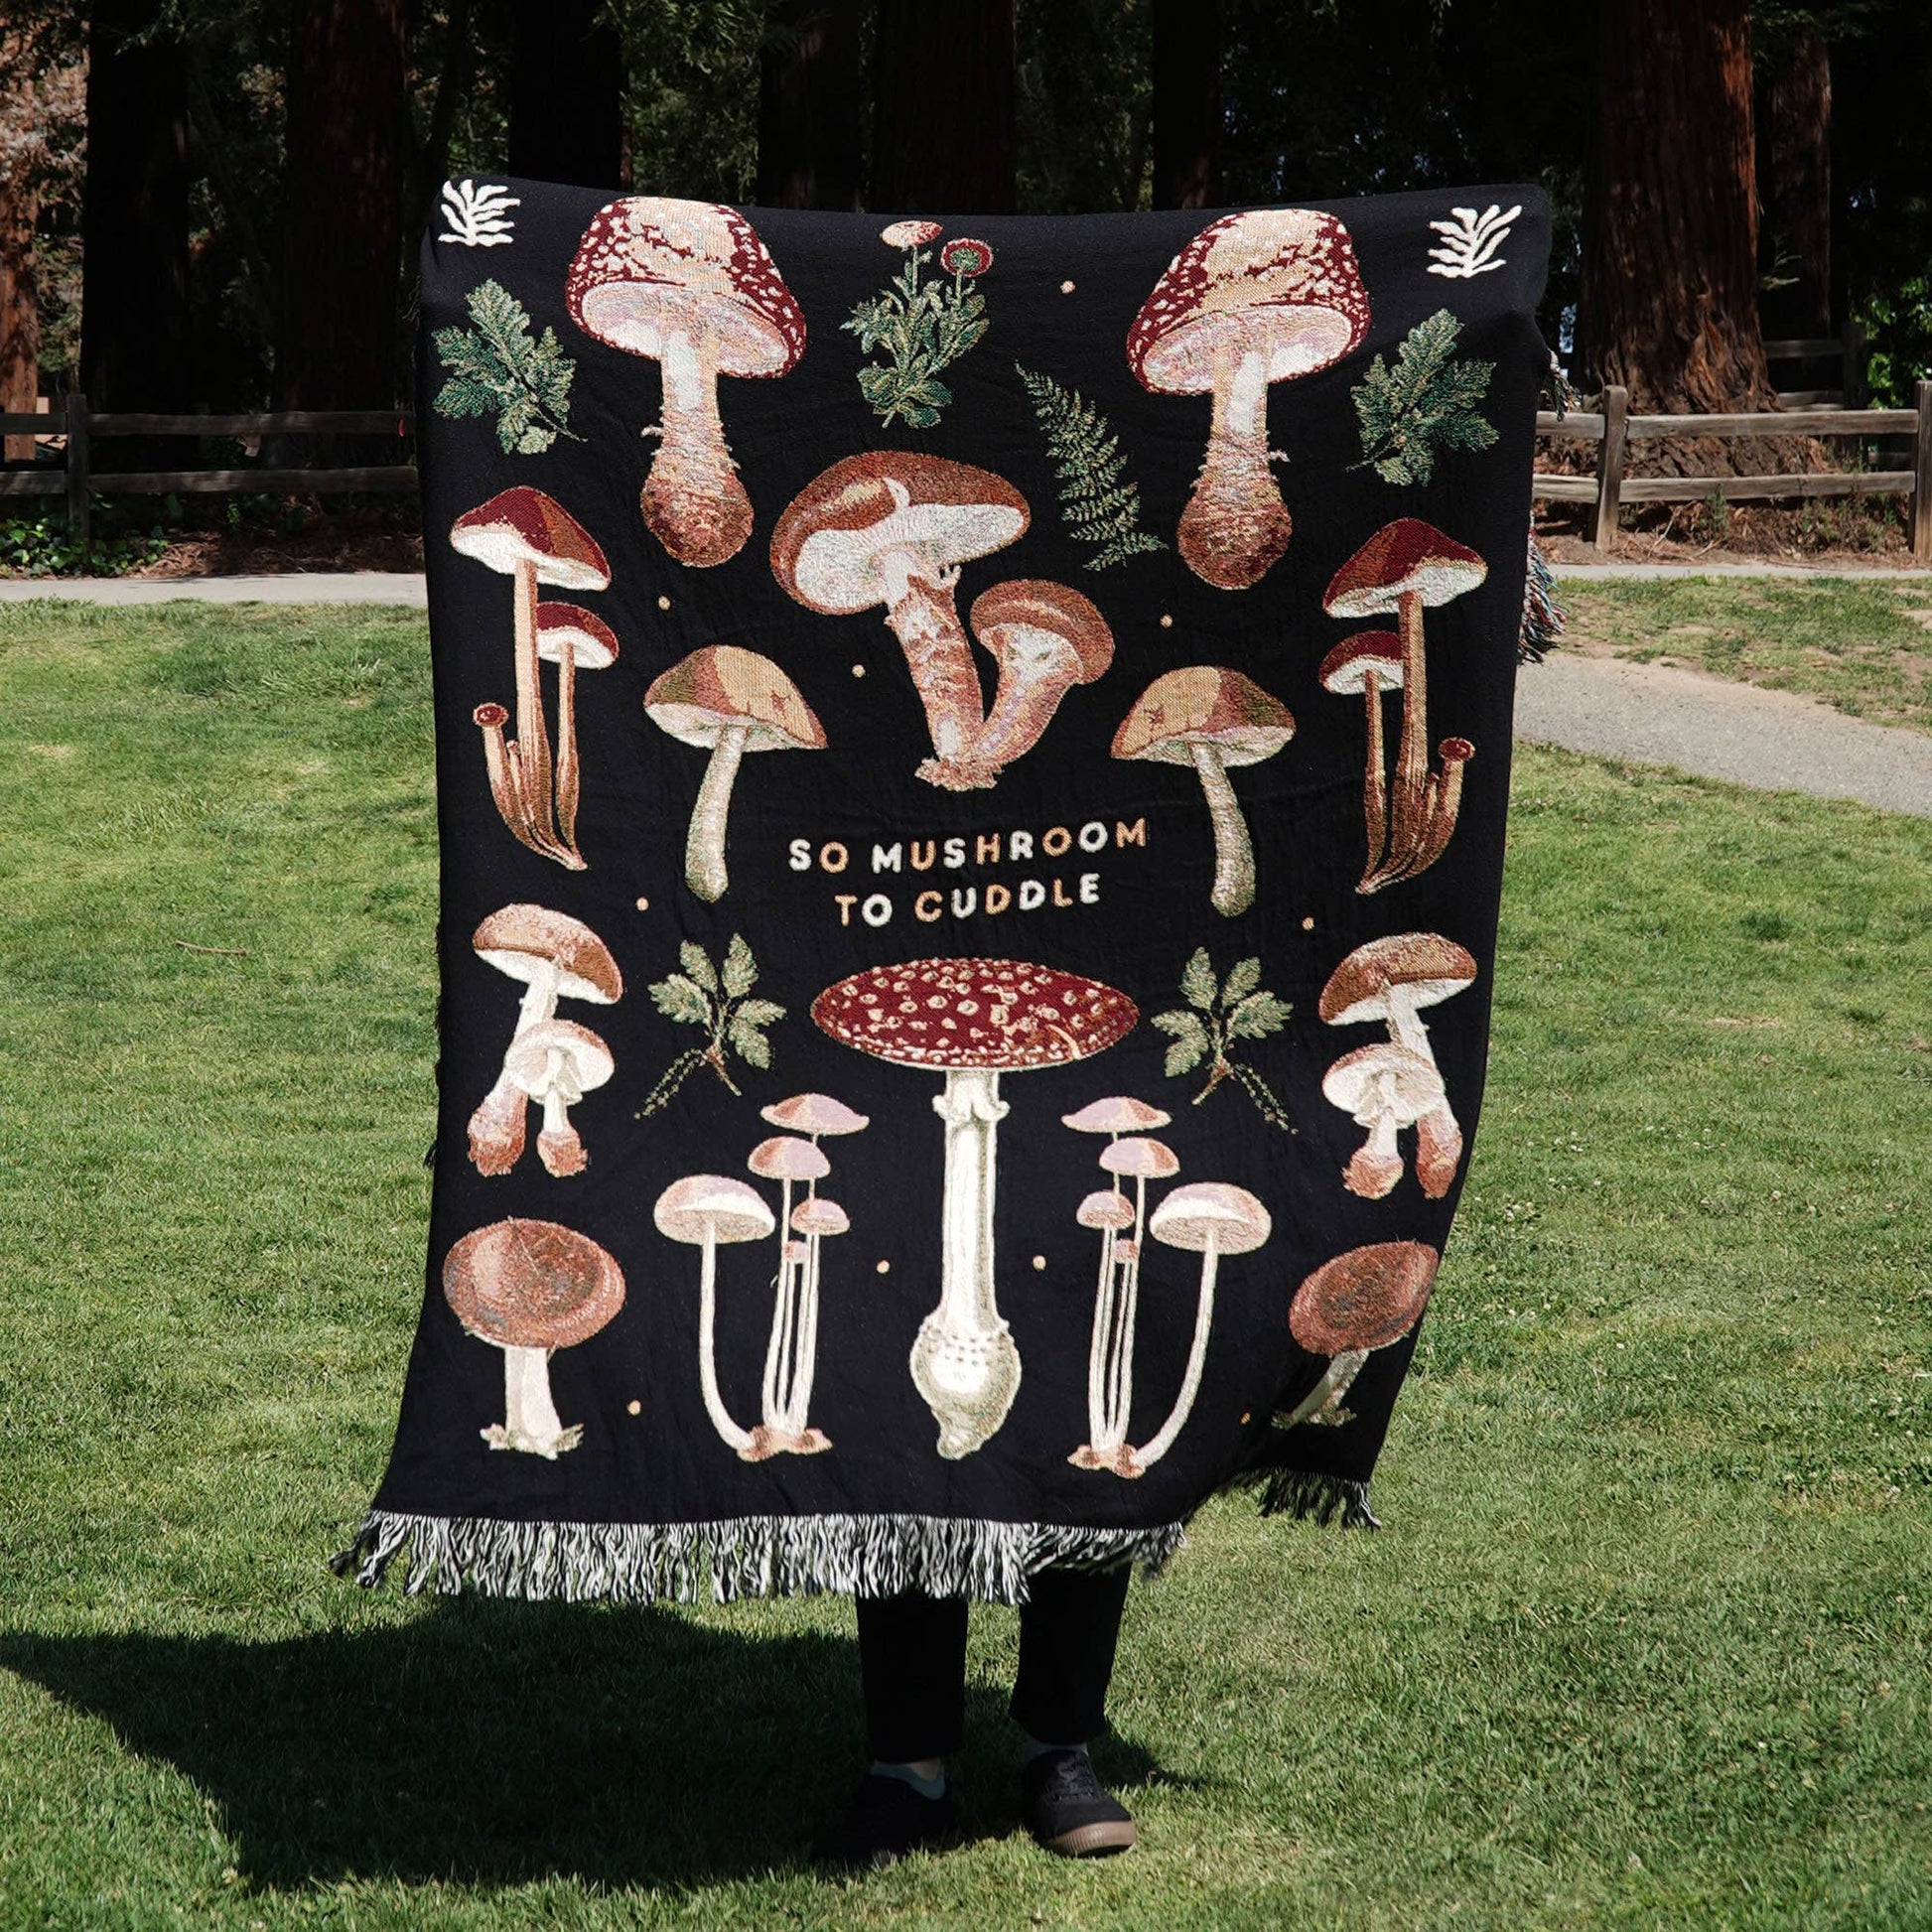 Mushroom throw blanket held up by someone standing on grass 